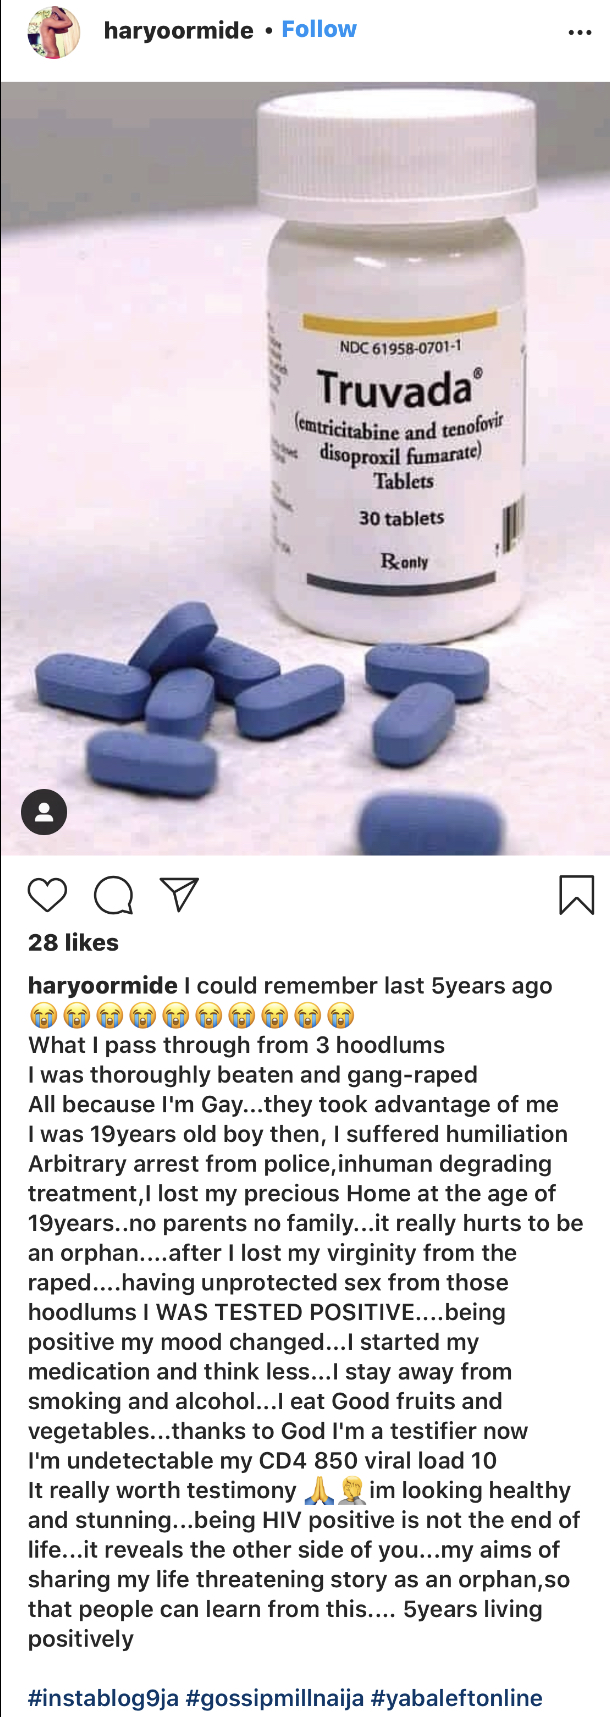 The gay activist’s post